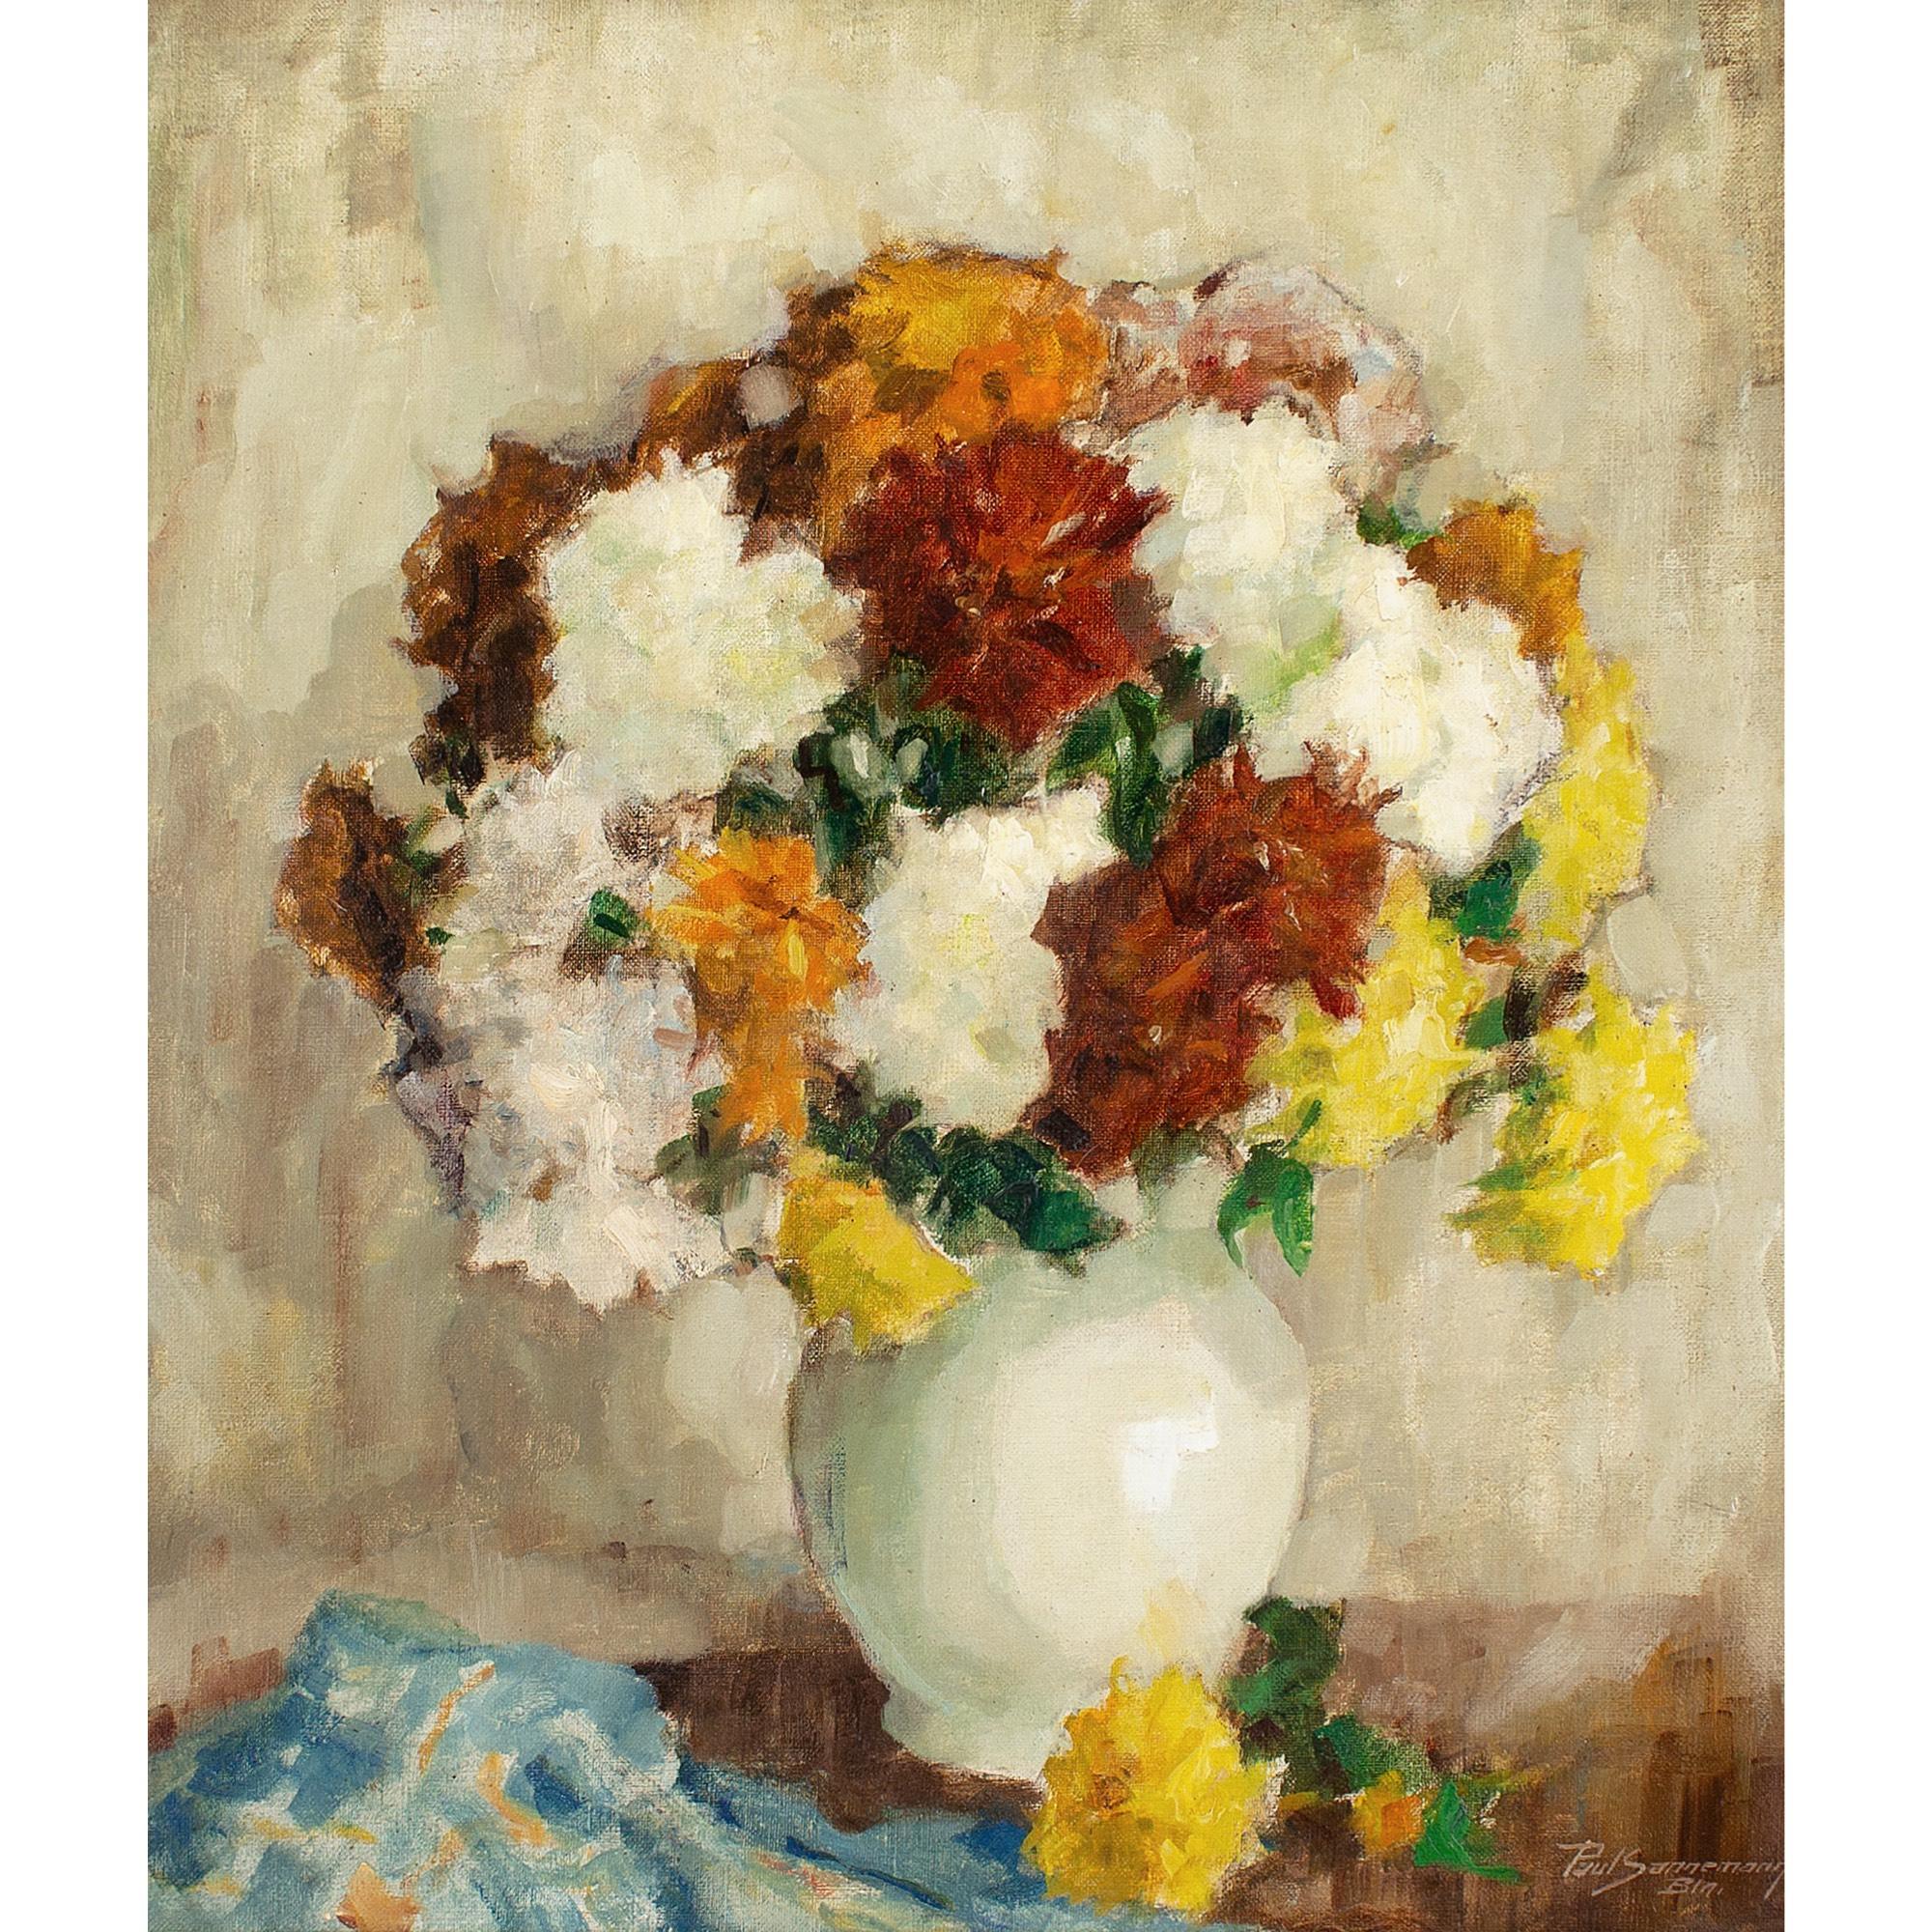 This early 20th-century oil painting by German artist Paul Sannemann (1886-1943) depicts a vibrant still life with chrysanthemums.

Sannemann had an eye for colour, never one to shy away from a vivid composition. Here, the blooms are effervescent,